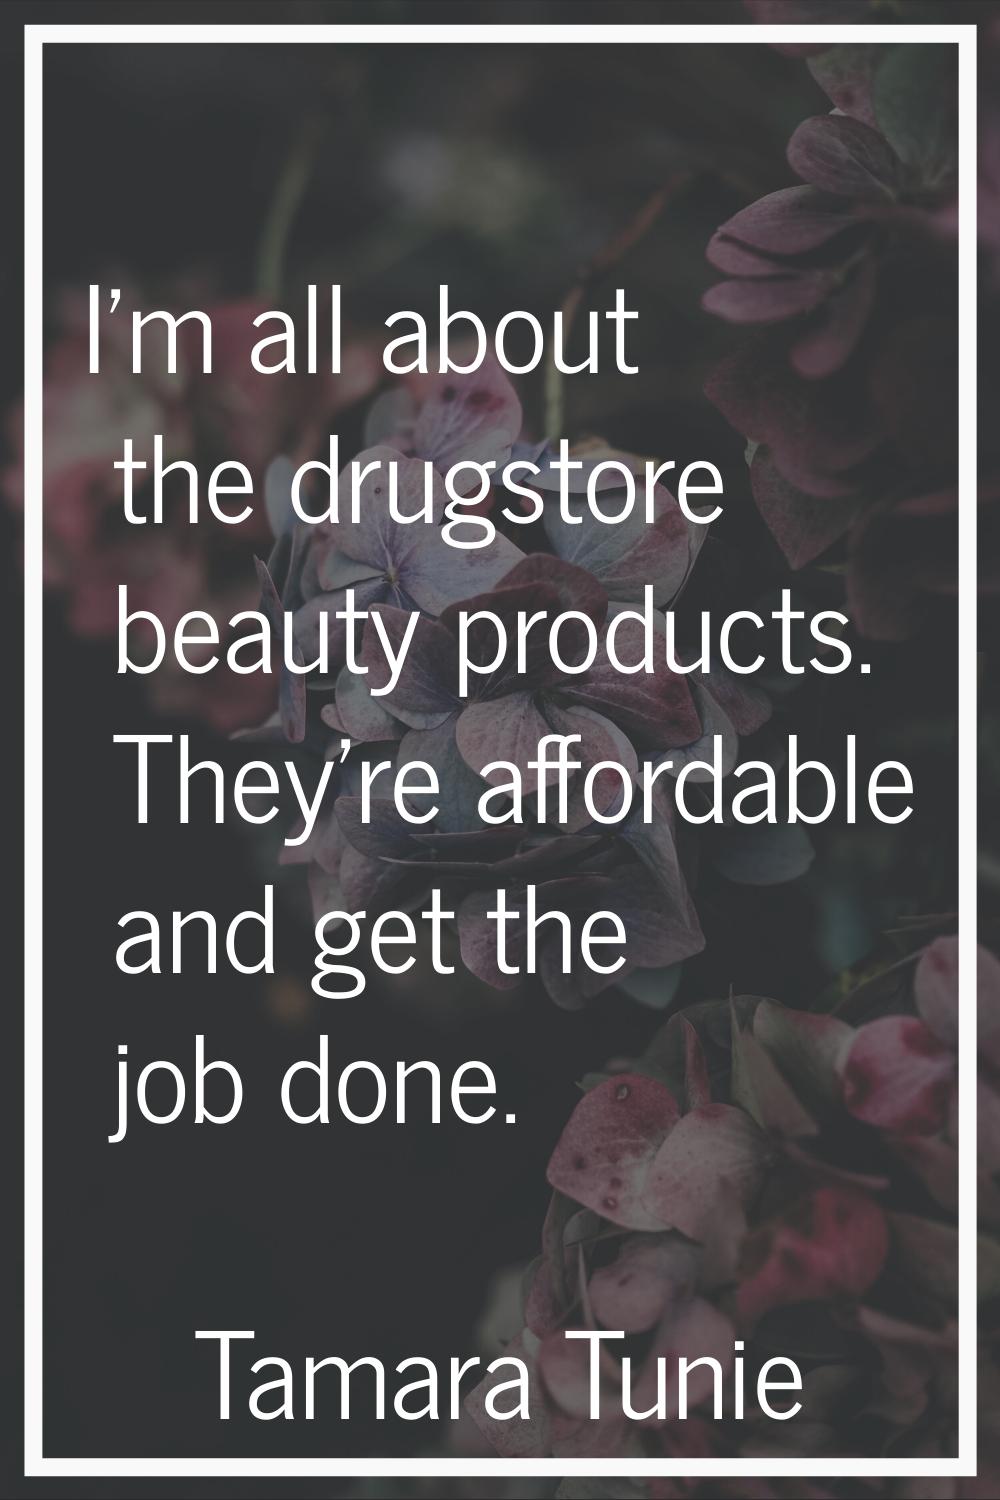 I'm all about the drugstore beauty products. They're affordable and get the job done.